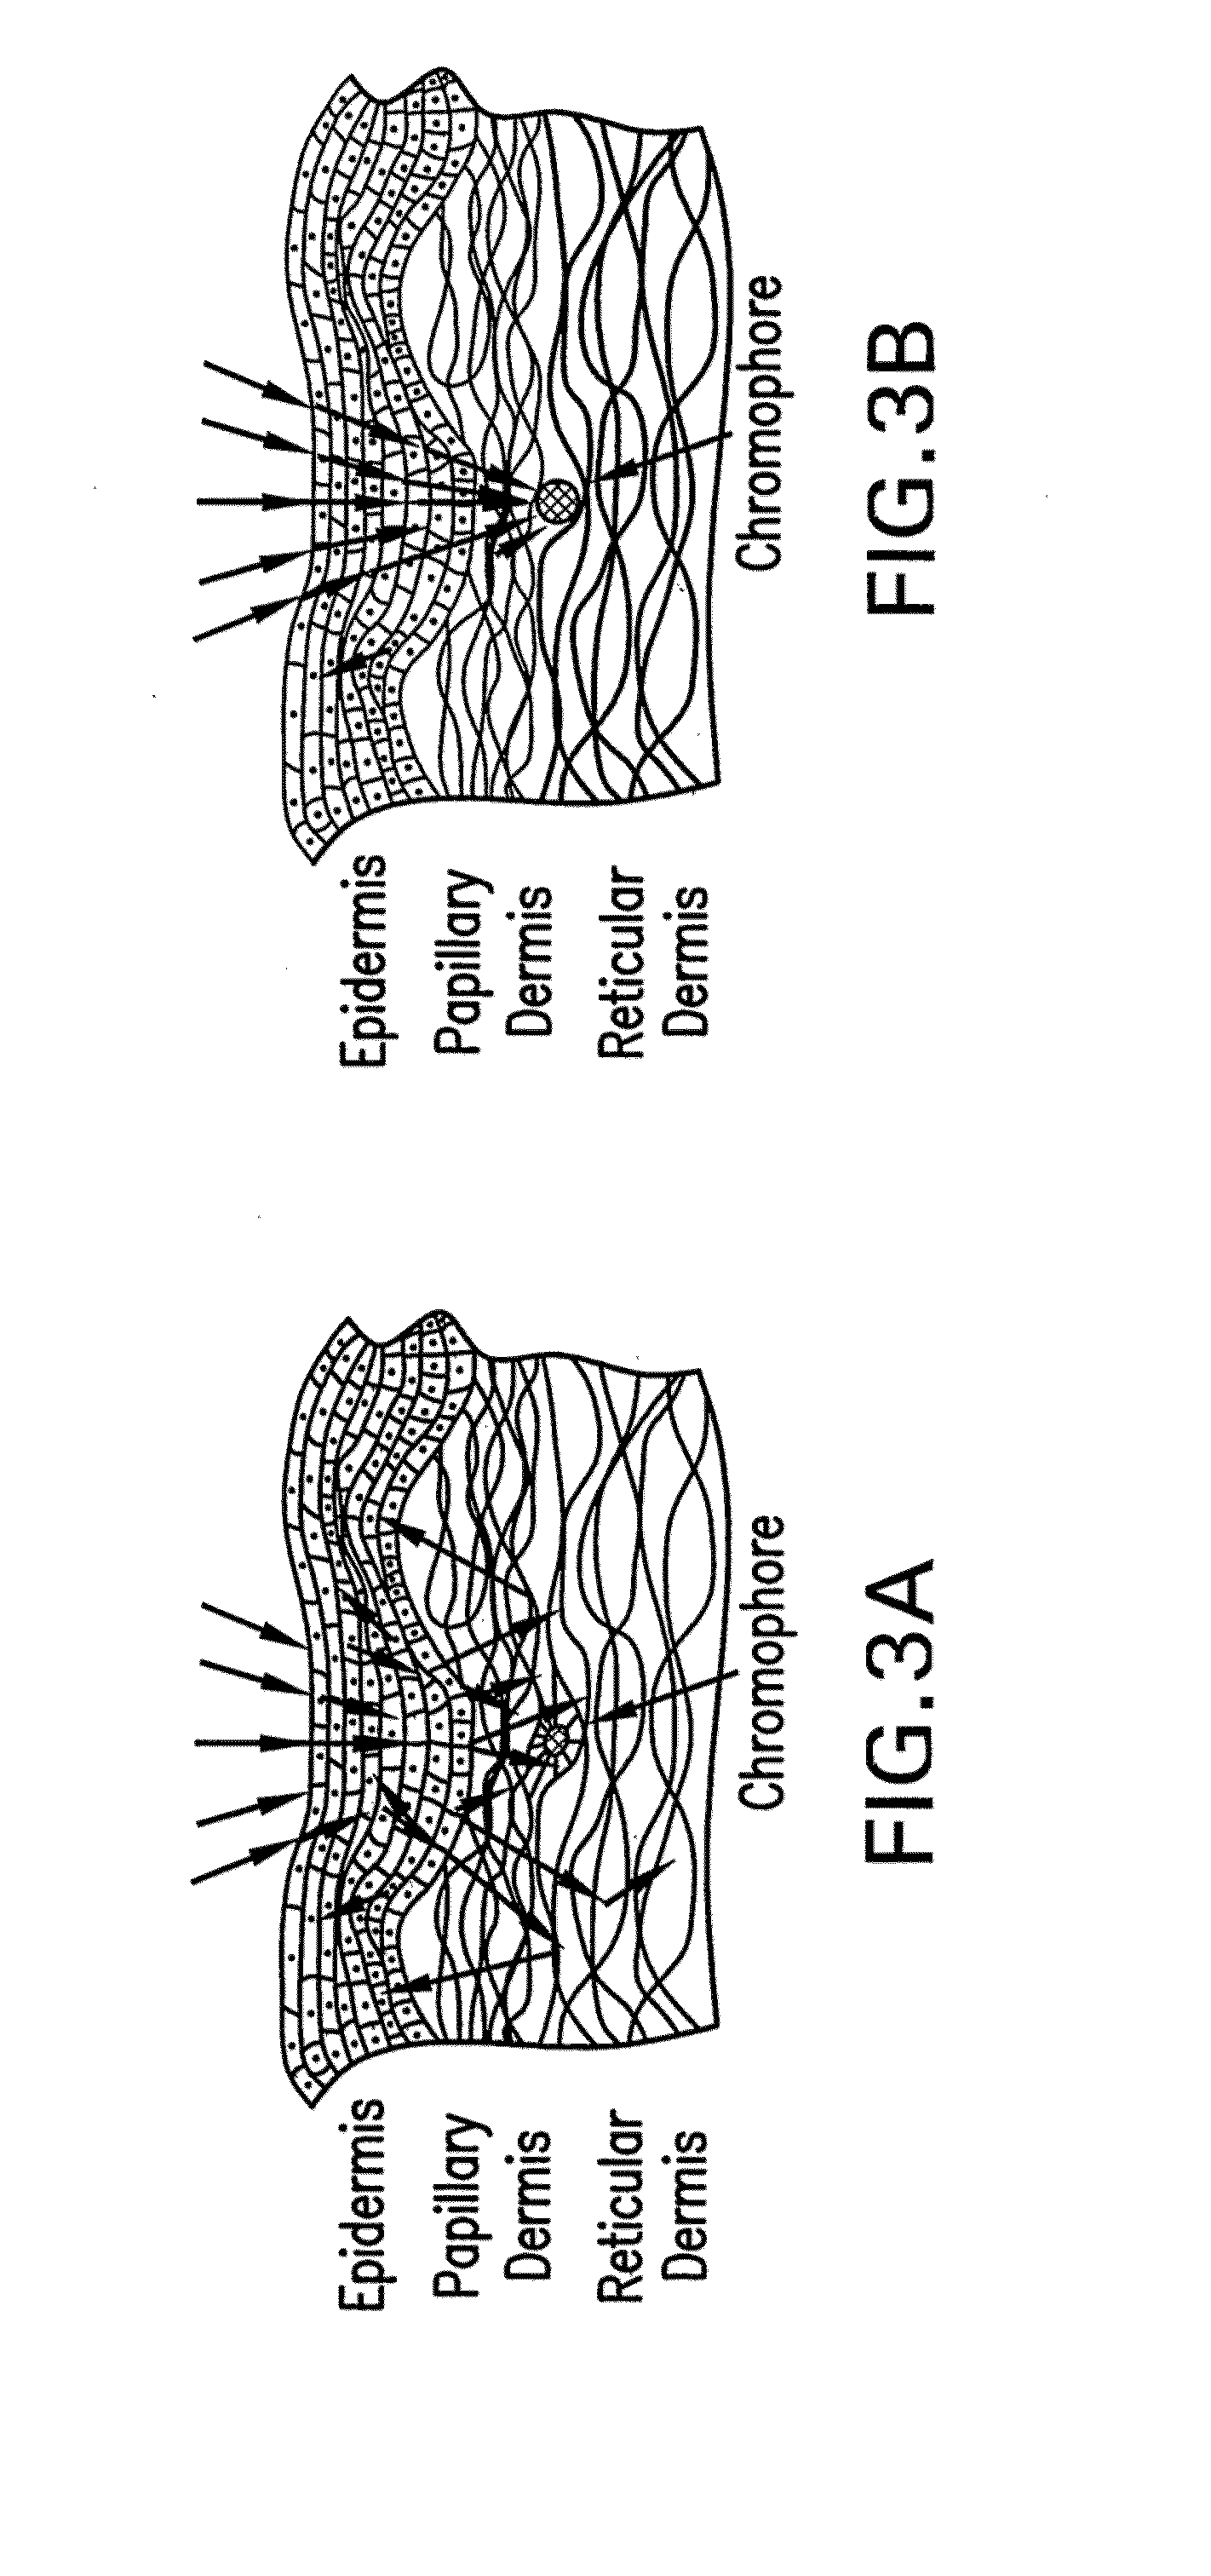 System, devices, and methods for optically clearing tissue